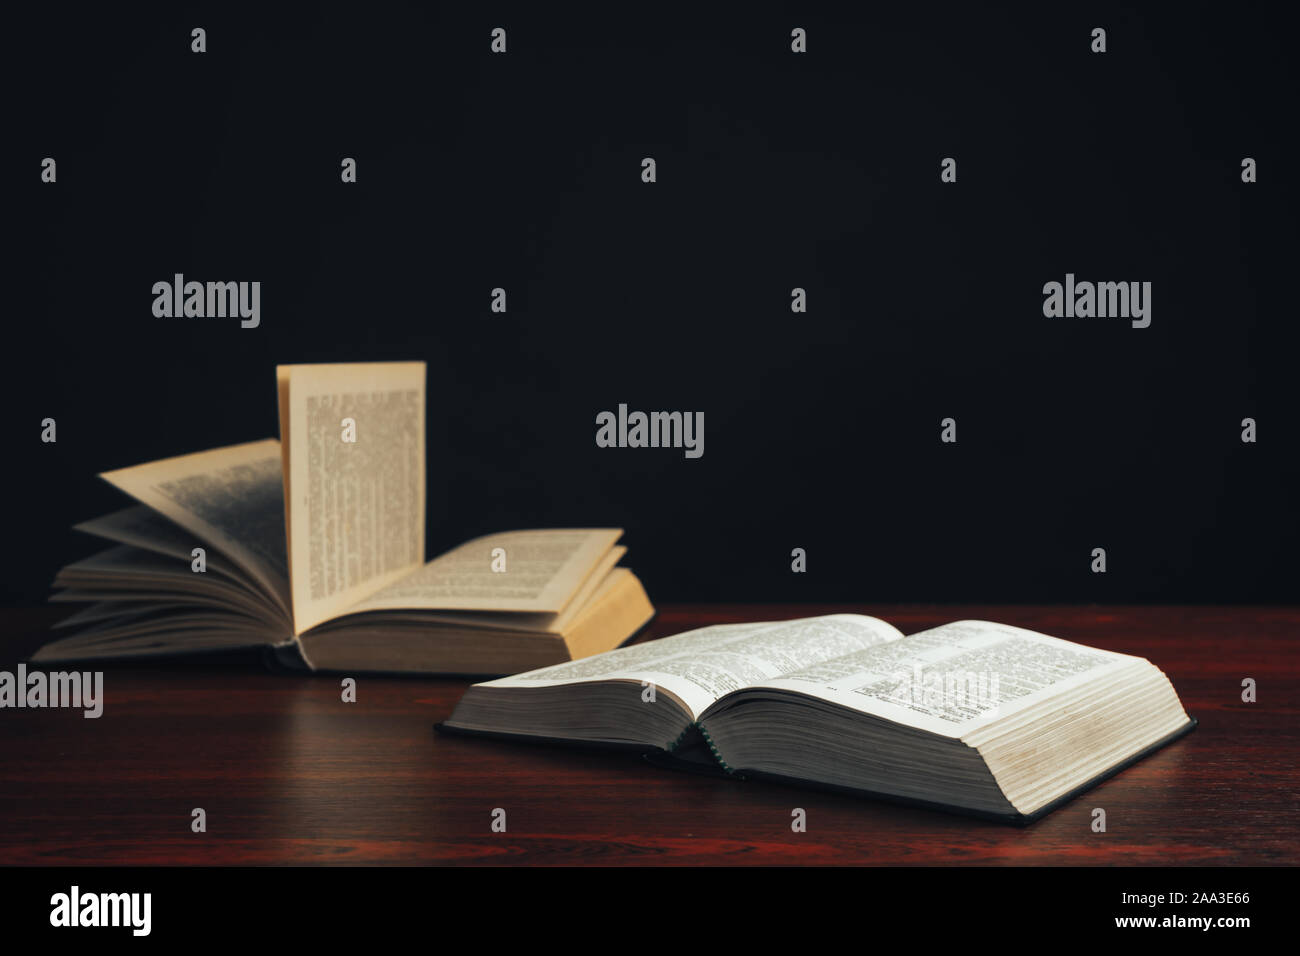 Open bible on a  red wooden table. Beautiful black background. Stock Photo